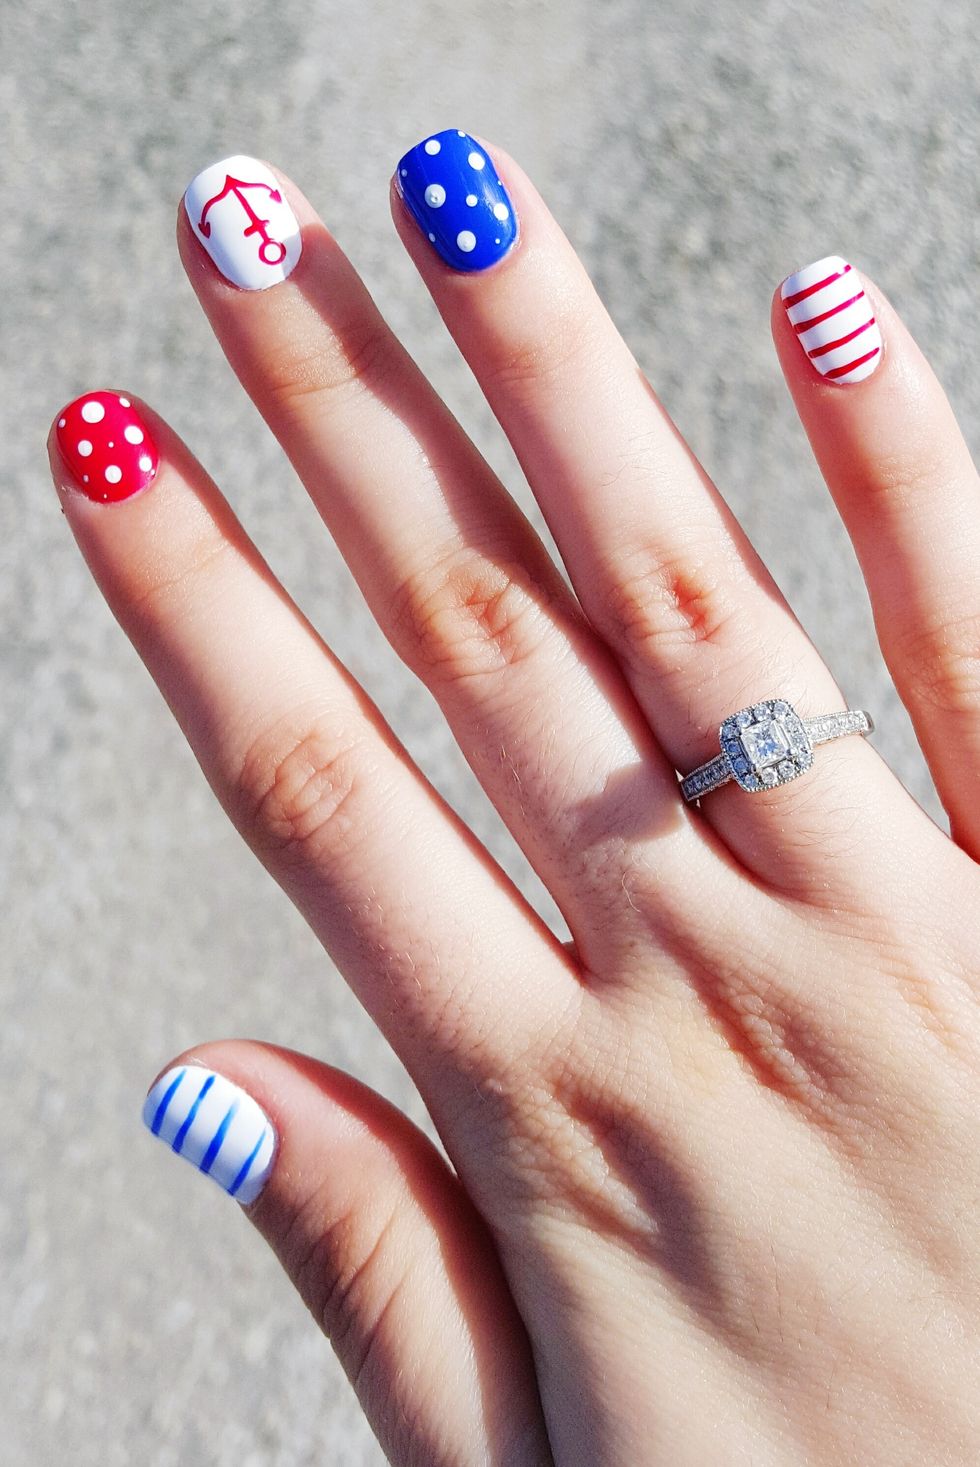 nails that feature different designs on each fingernail, like blue stripes on a white base, white polka dots on a red base, a red anchor on a white base, white dots on a blue base, and red lines on a white base